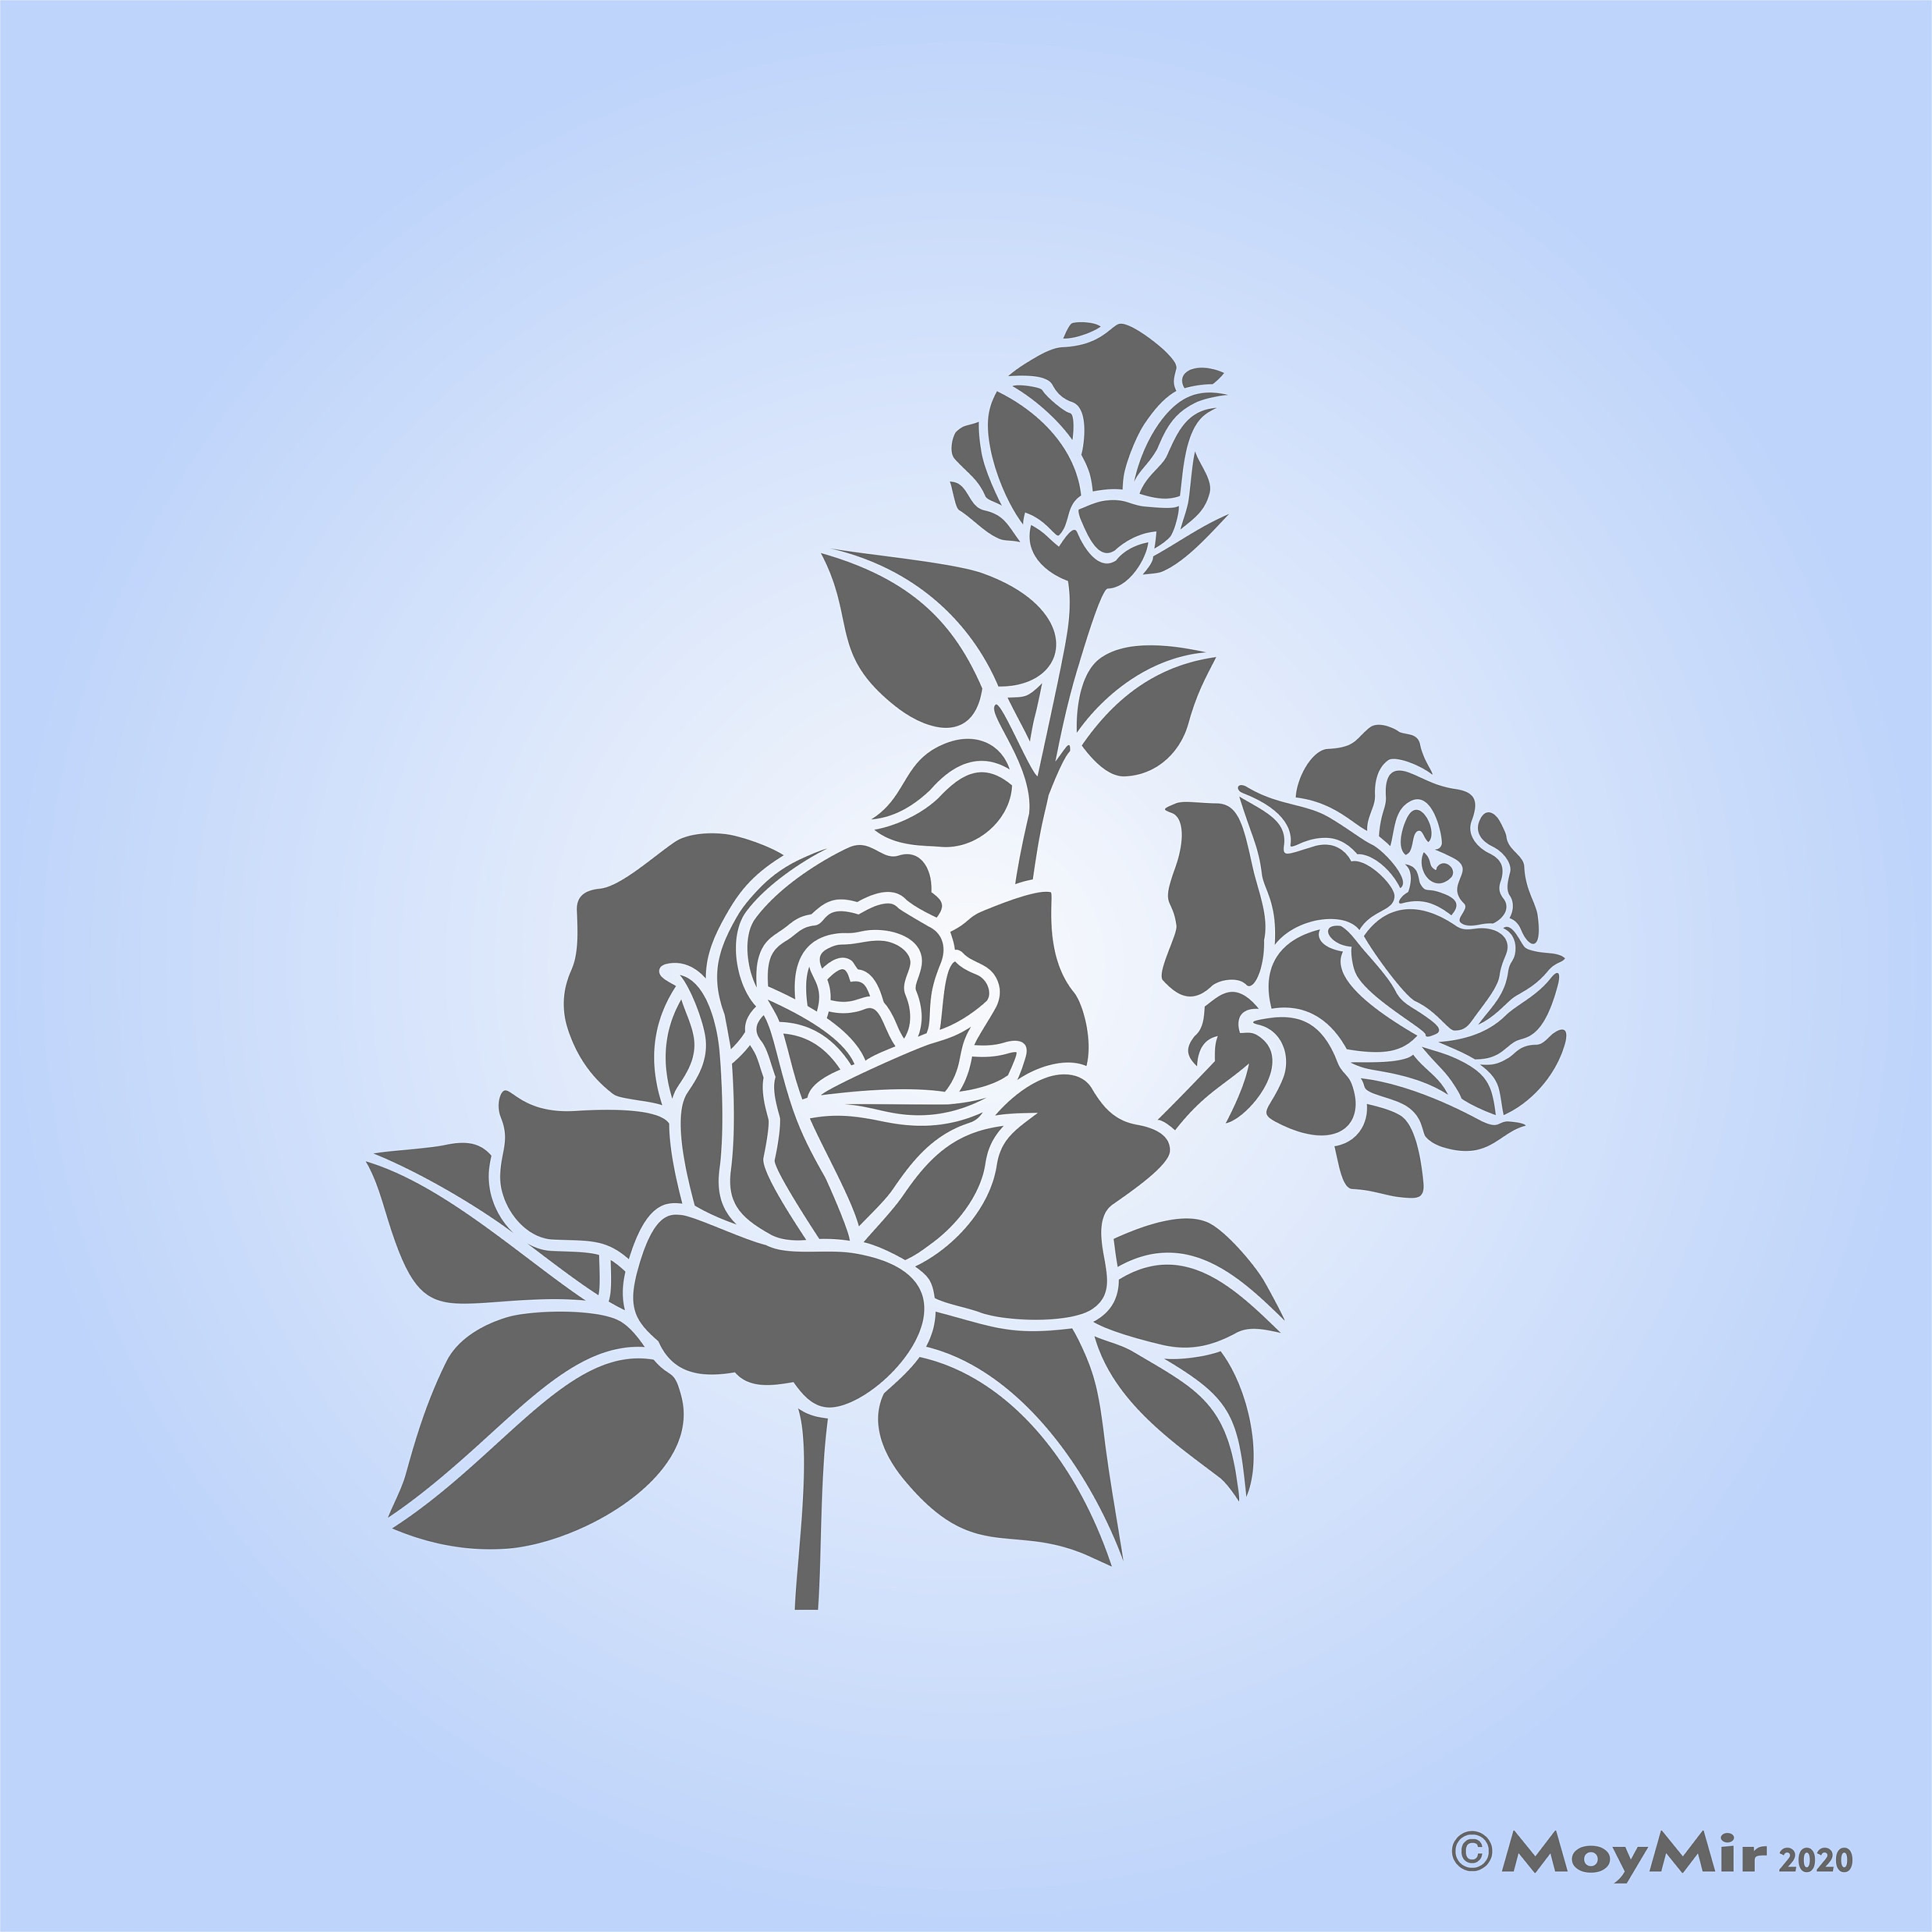 Stainless Steel Metal Stencil Oblong Ornate Rose Floral Emboss